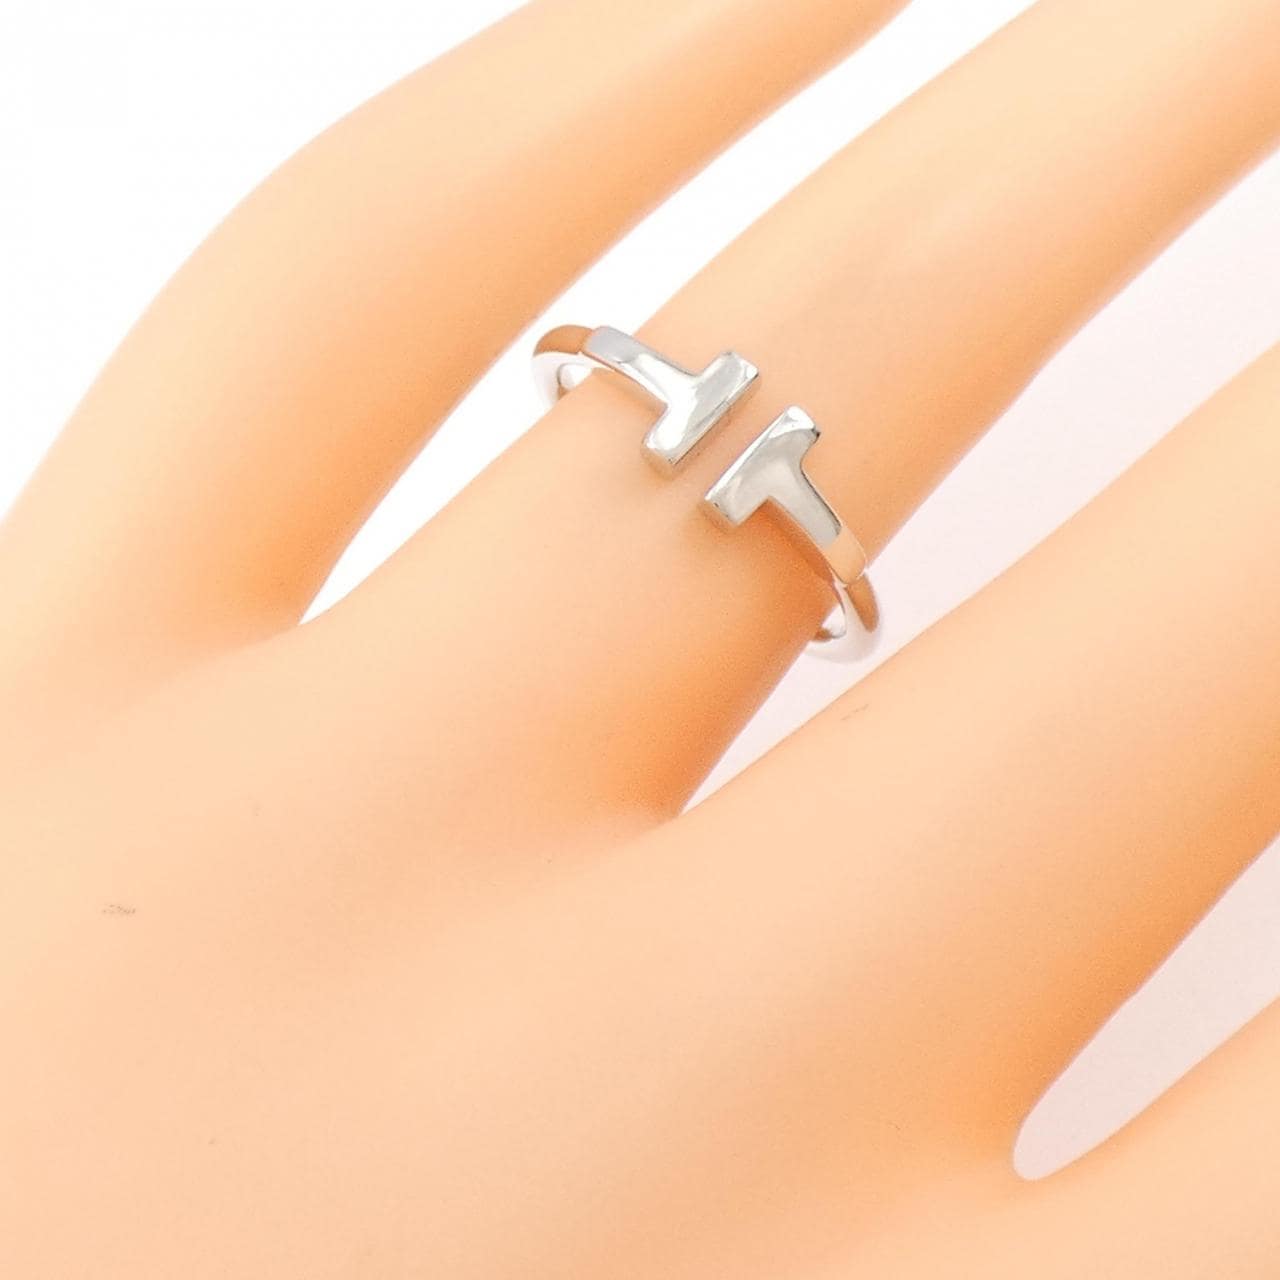 TIFFANY T wire ring